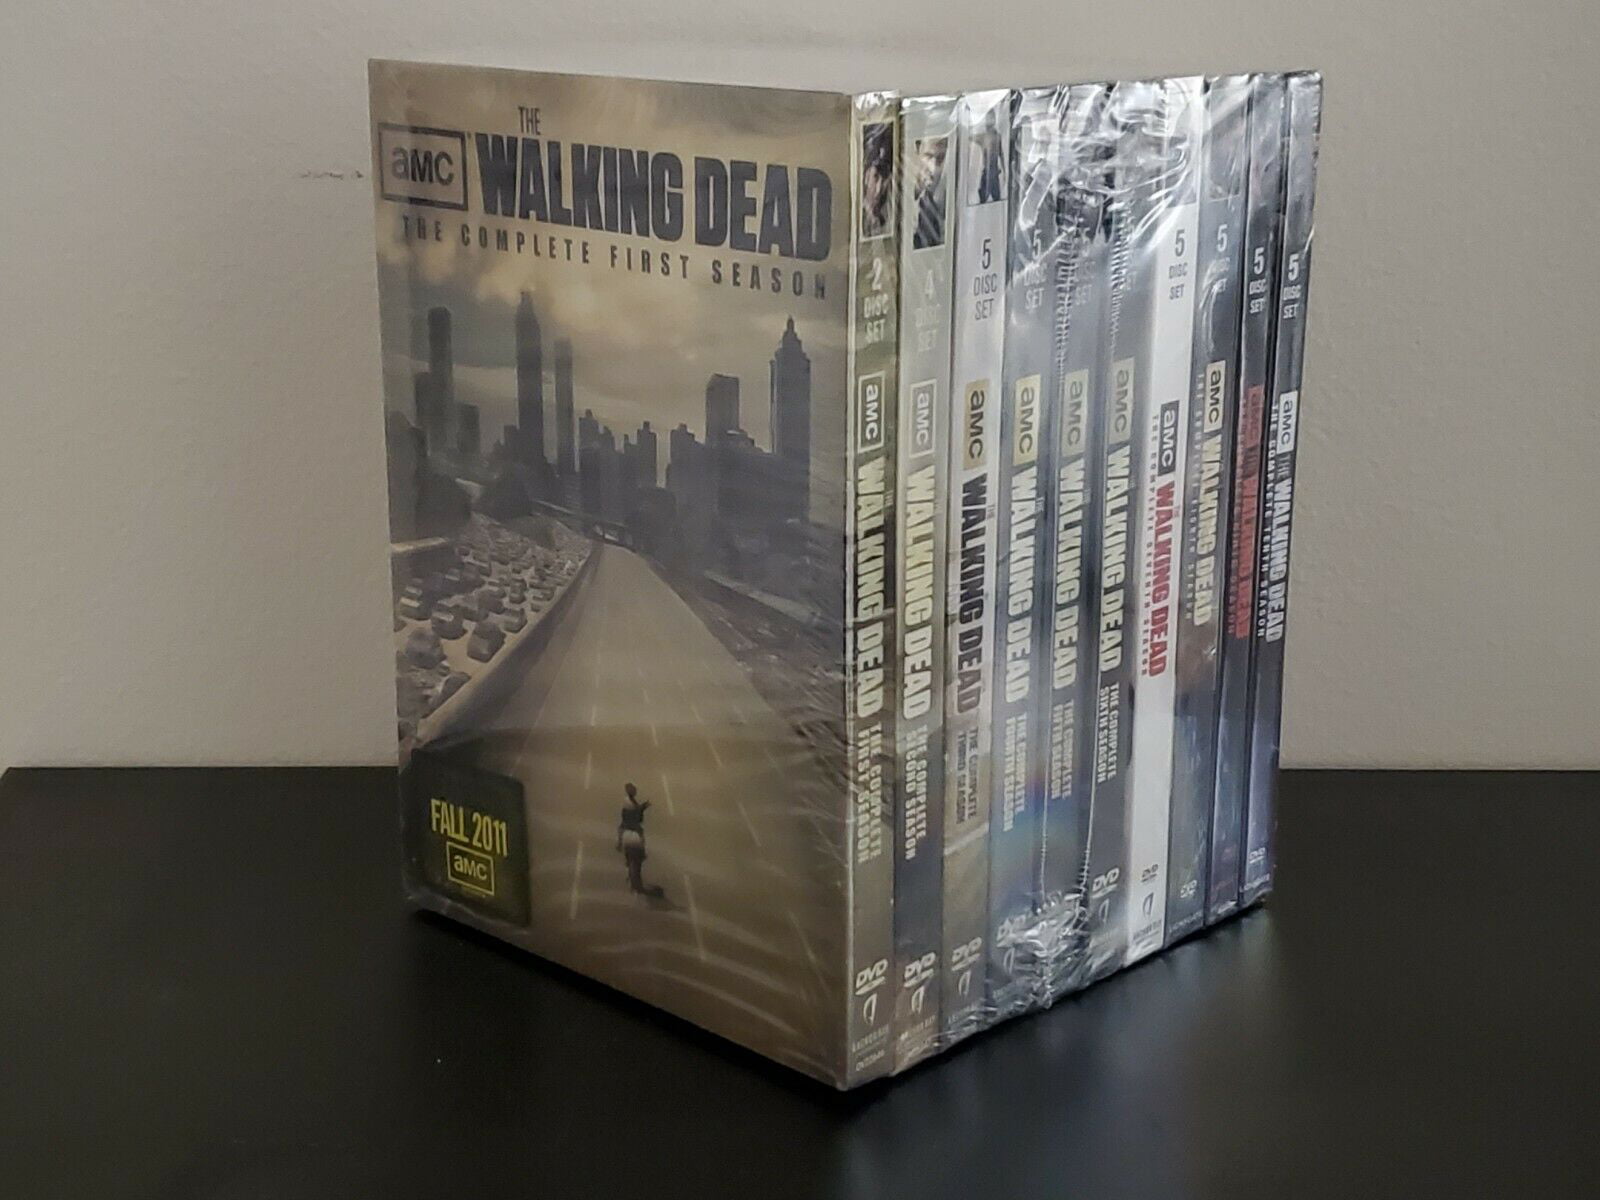 THE WALKING DEAD 1-9 Complete Series1 2 3 4 5 6 7 8 9 10 DVD 1-10 DVD Free  Ship